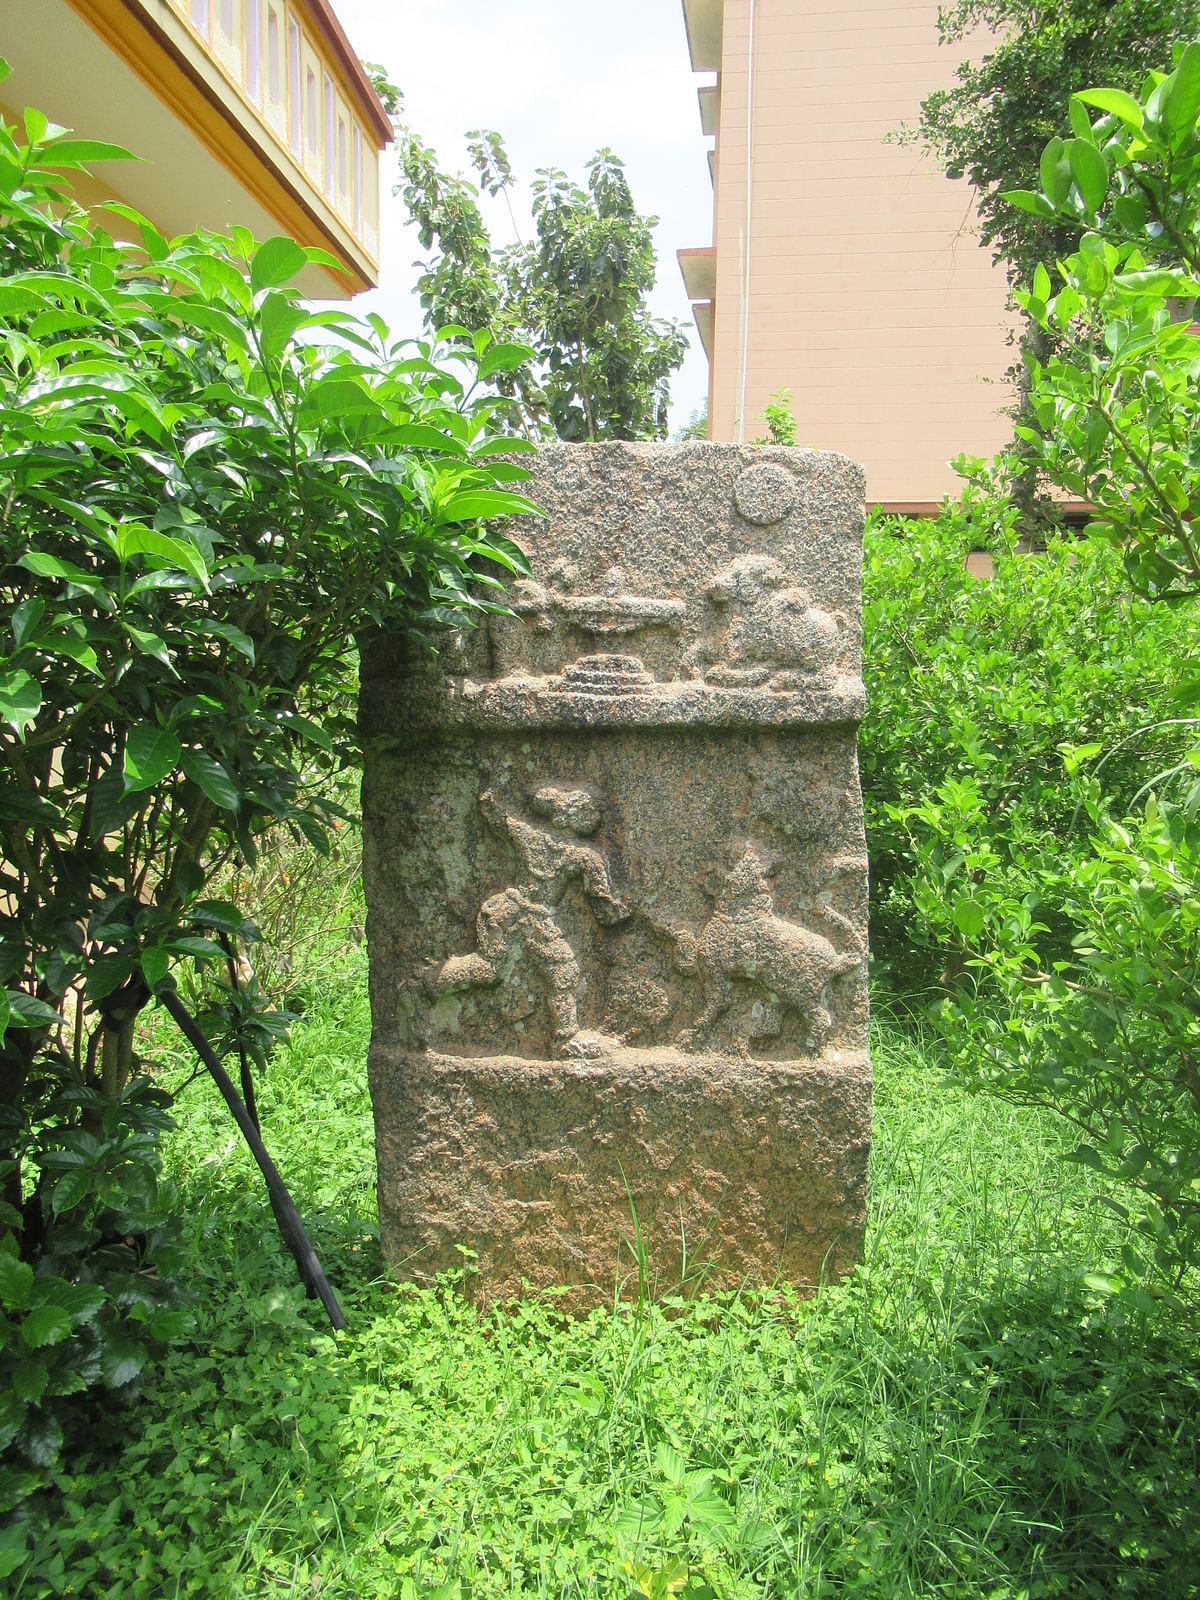 A five-foot-tall hero stone in the vicinity of the Jalamangala hill in Ramanagara district.